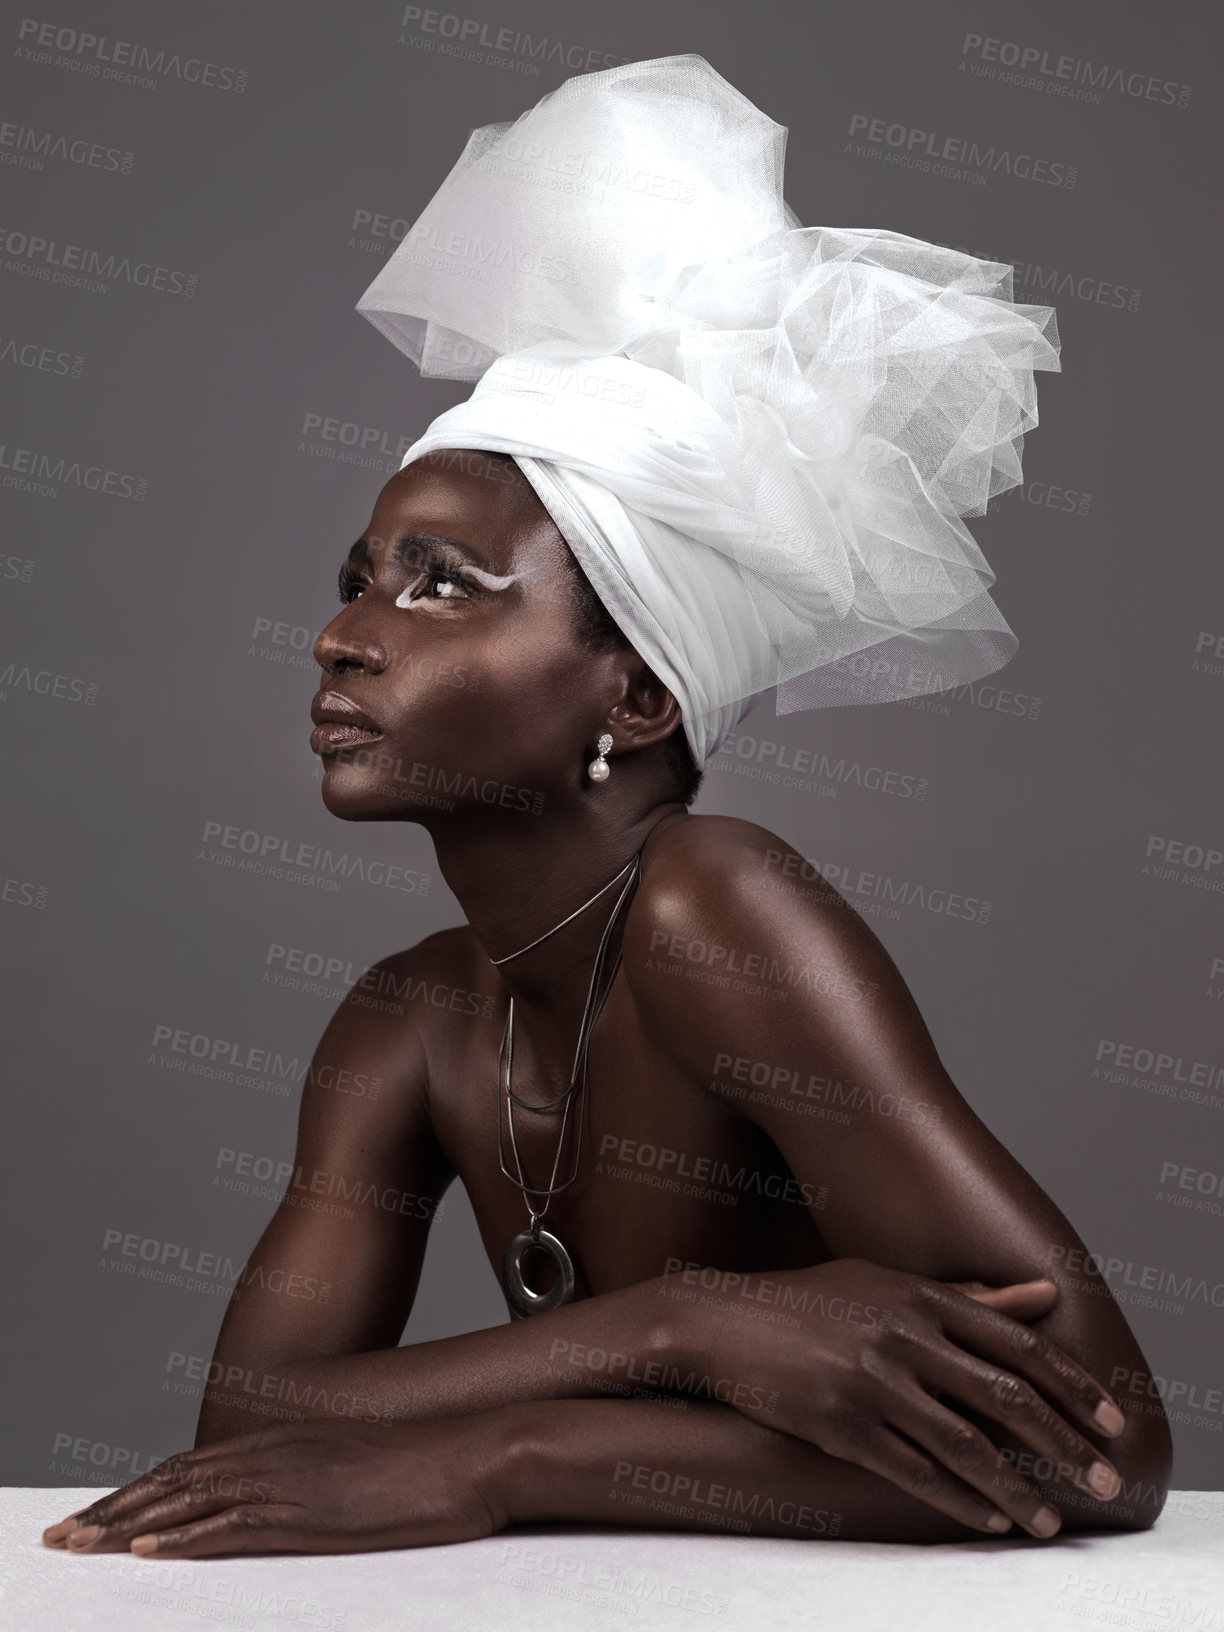 Buy stock photo Studio shot of an attractive young woman posing in traditional African attire against a grey background